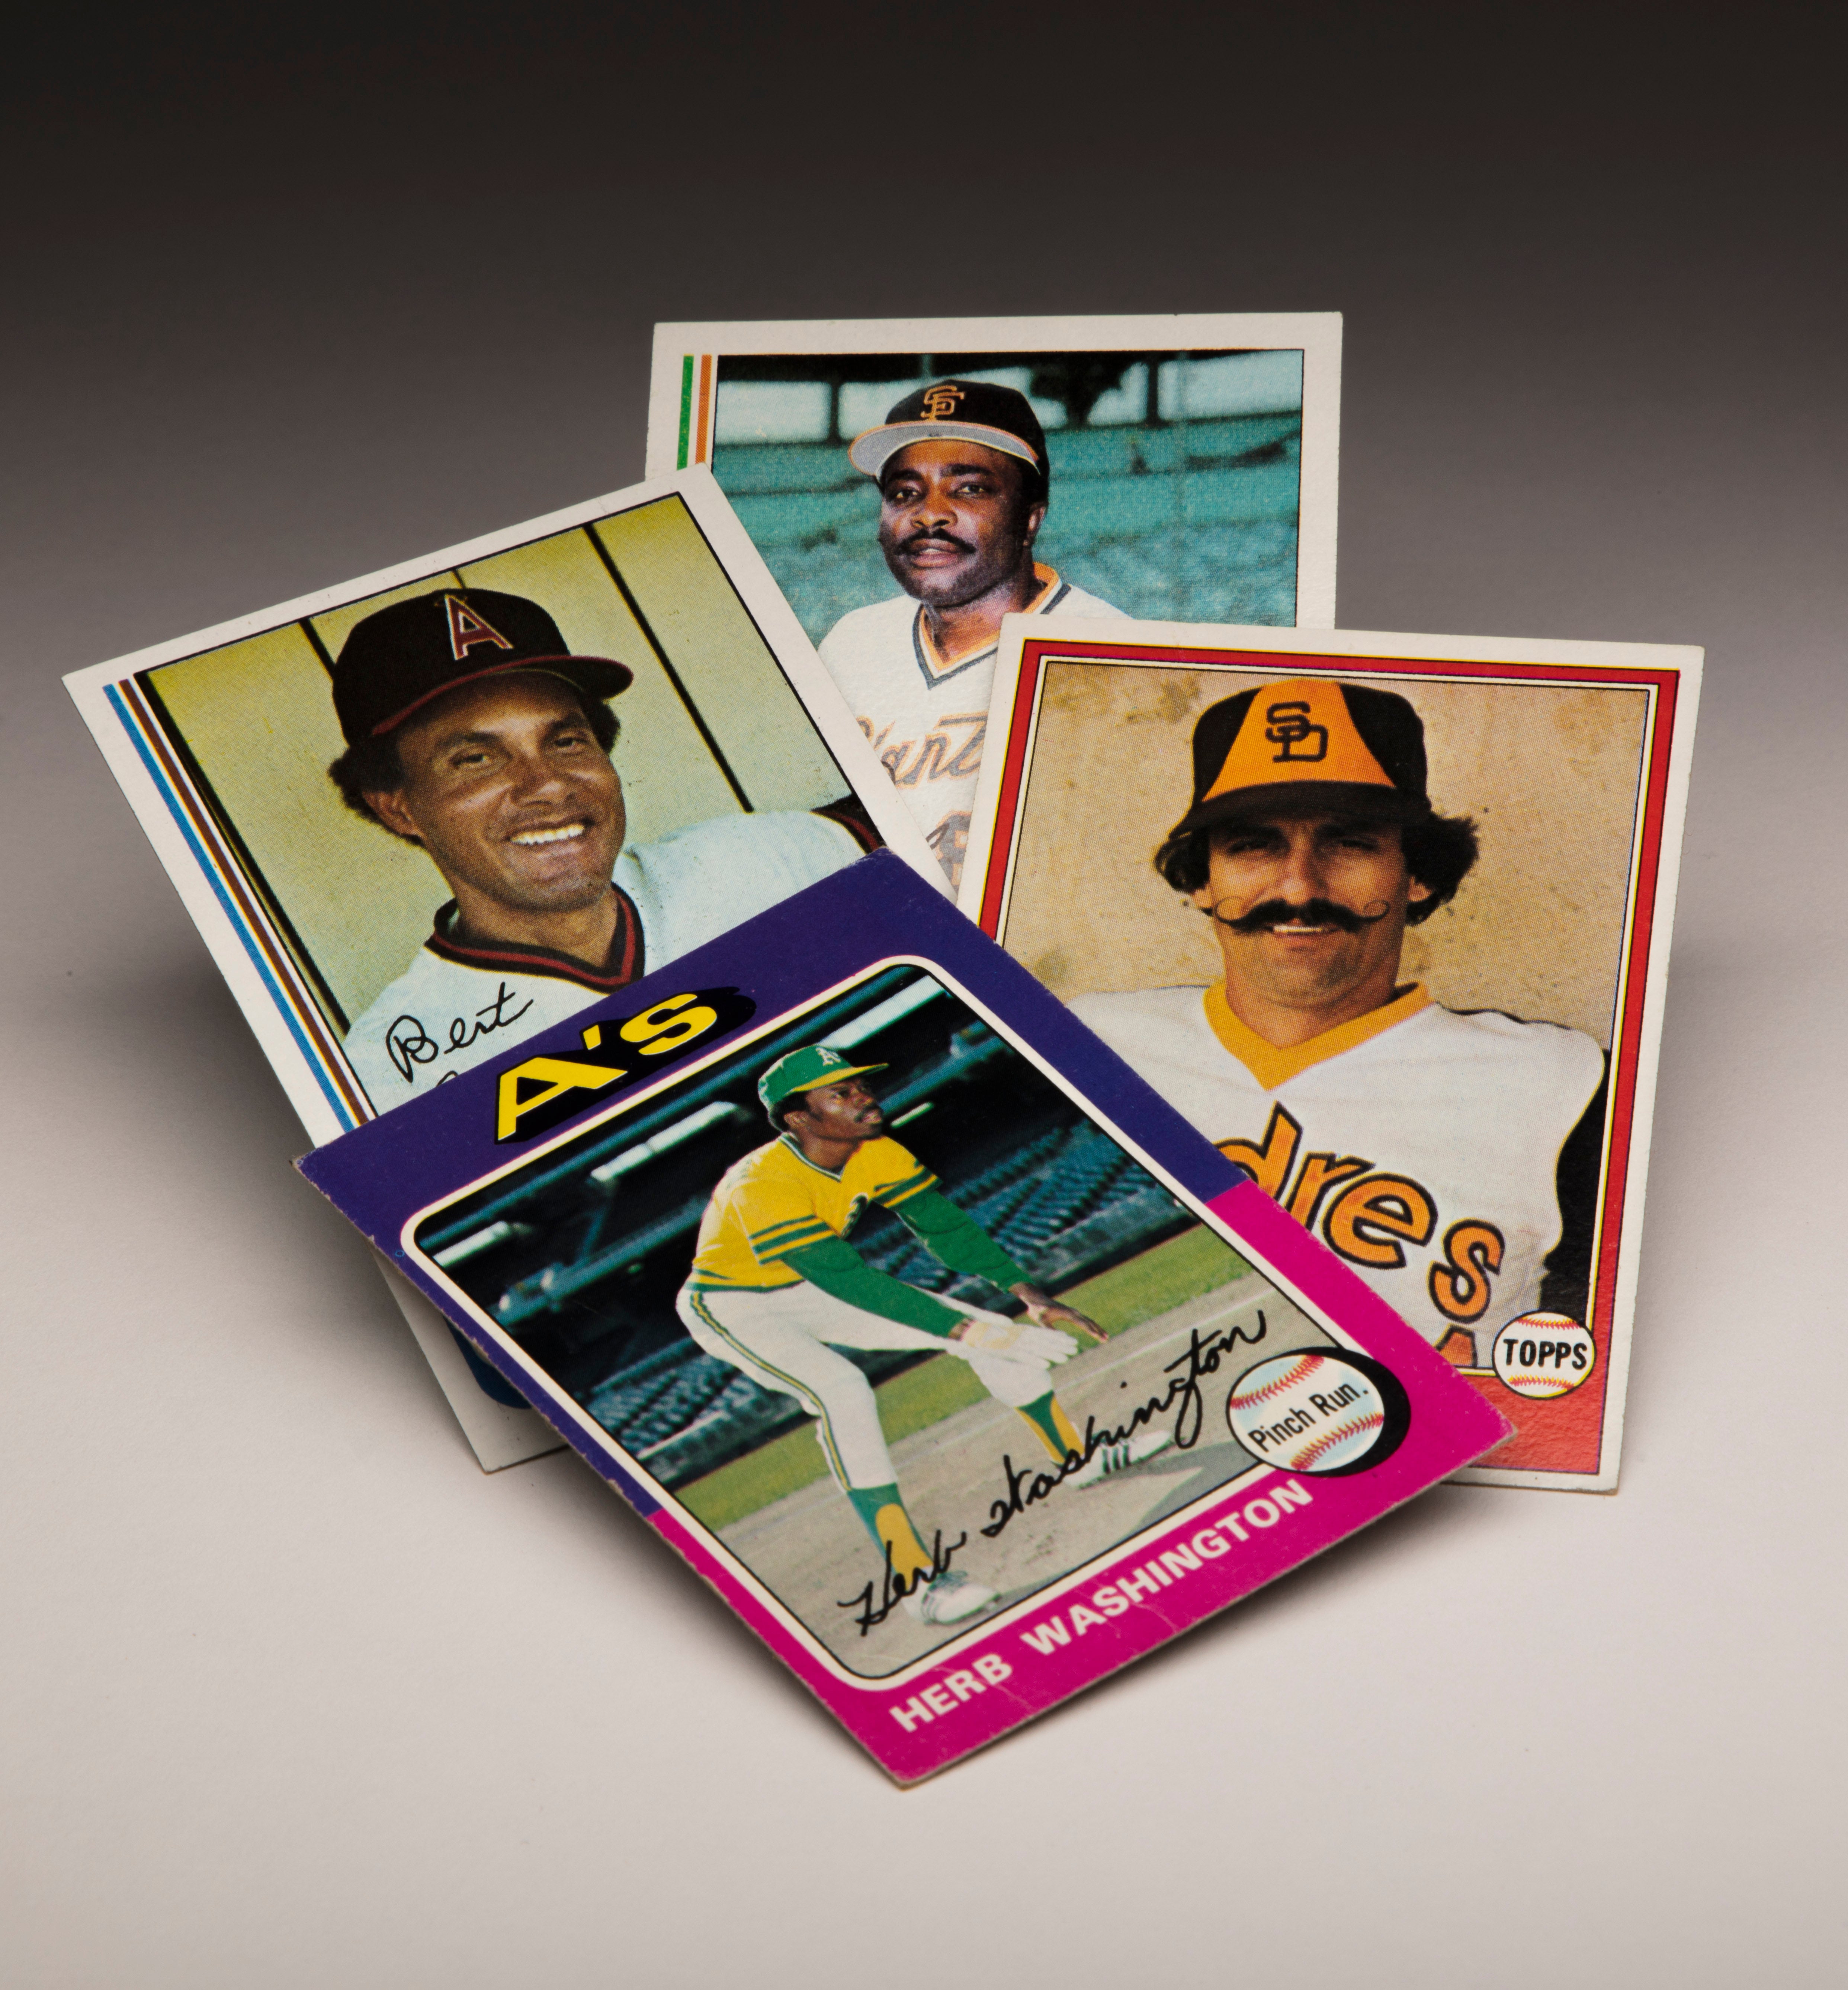 Doug McWilliams’ photographs for Topps have become part of history at the Hall of Fame